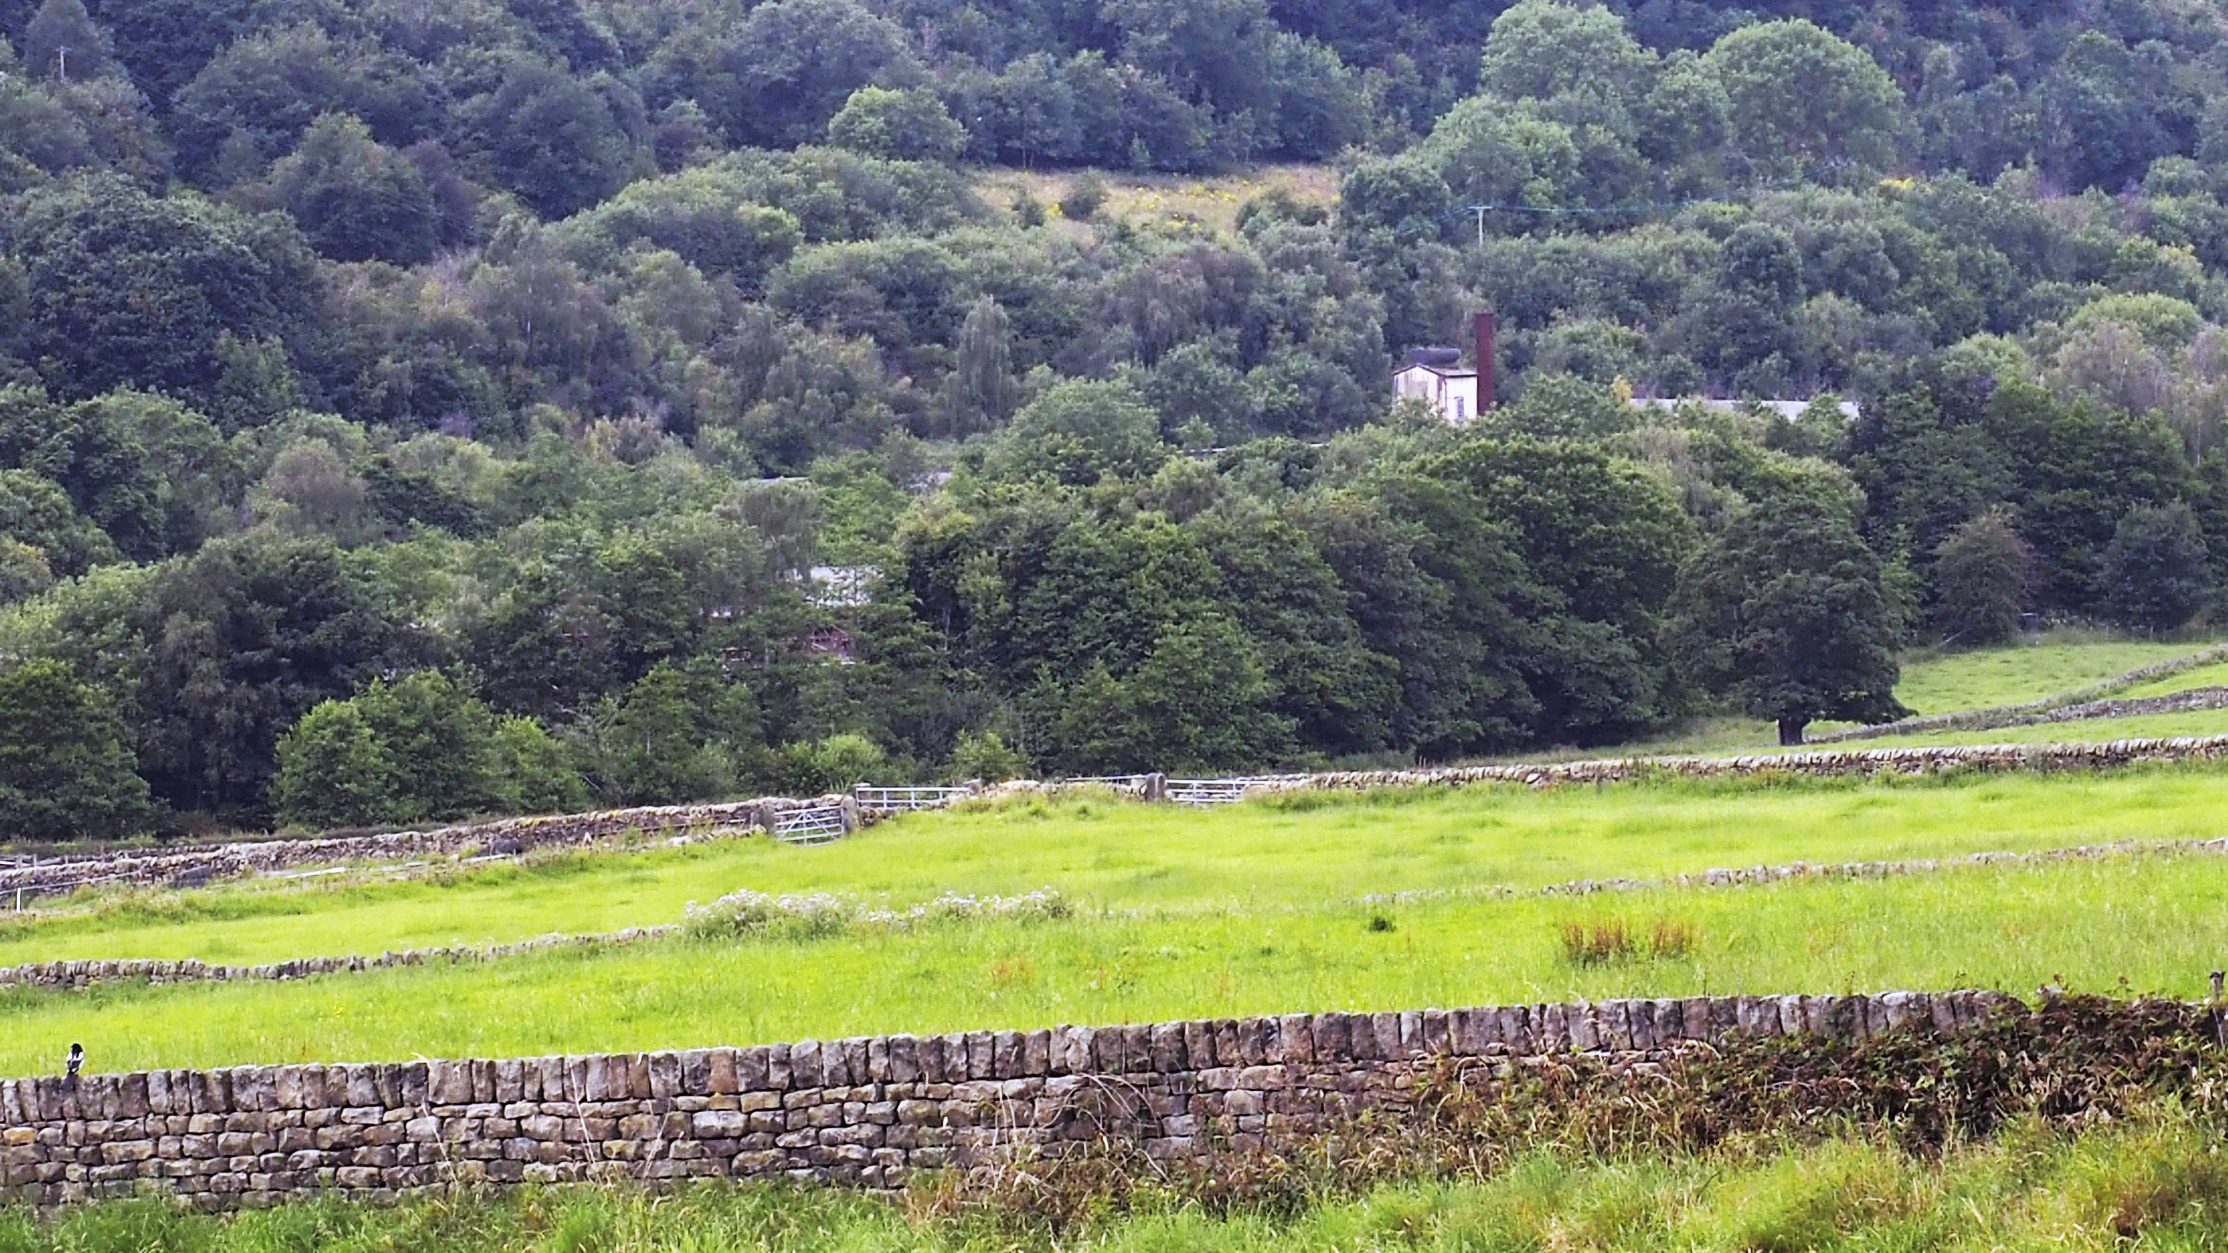 Loxley valley planning inquiry resumes for final three days